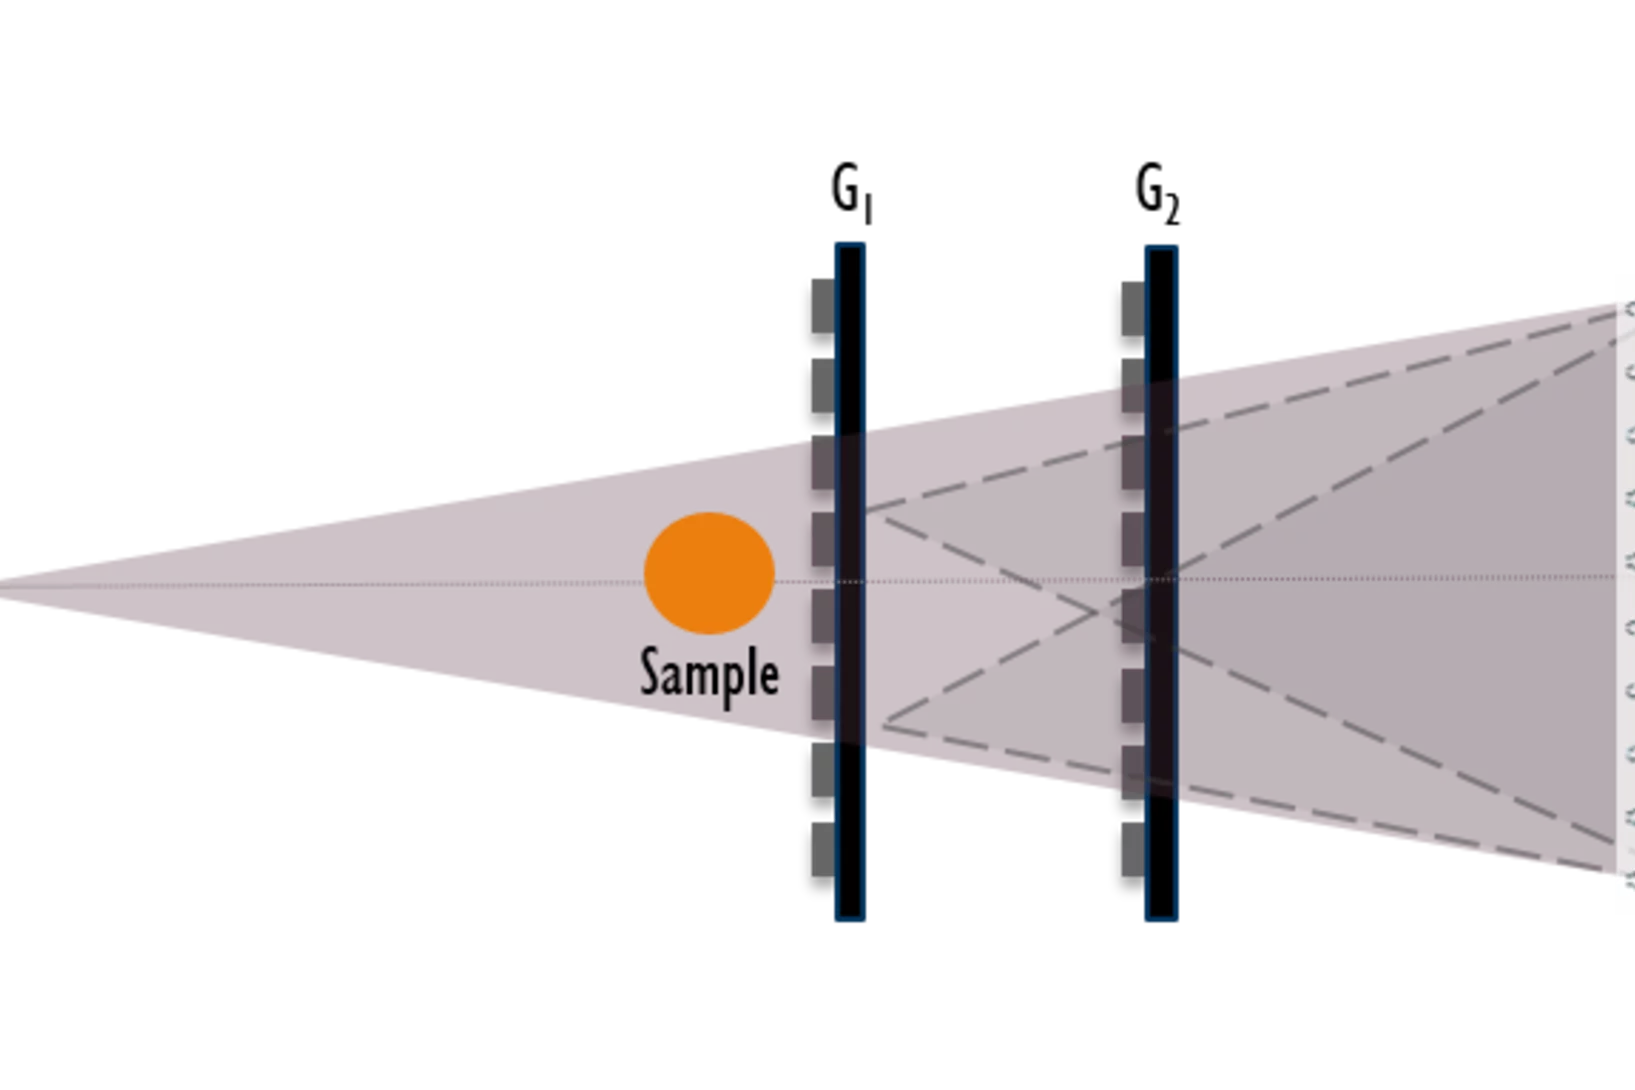 Sketch of a dual phase grating interferometer.